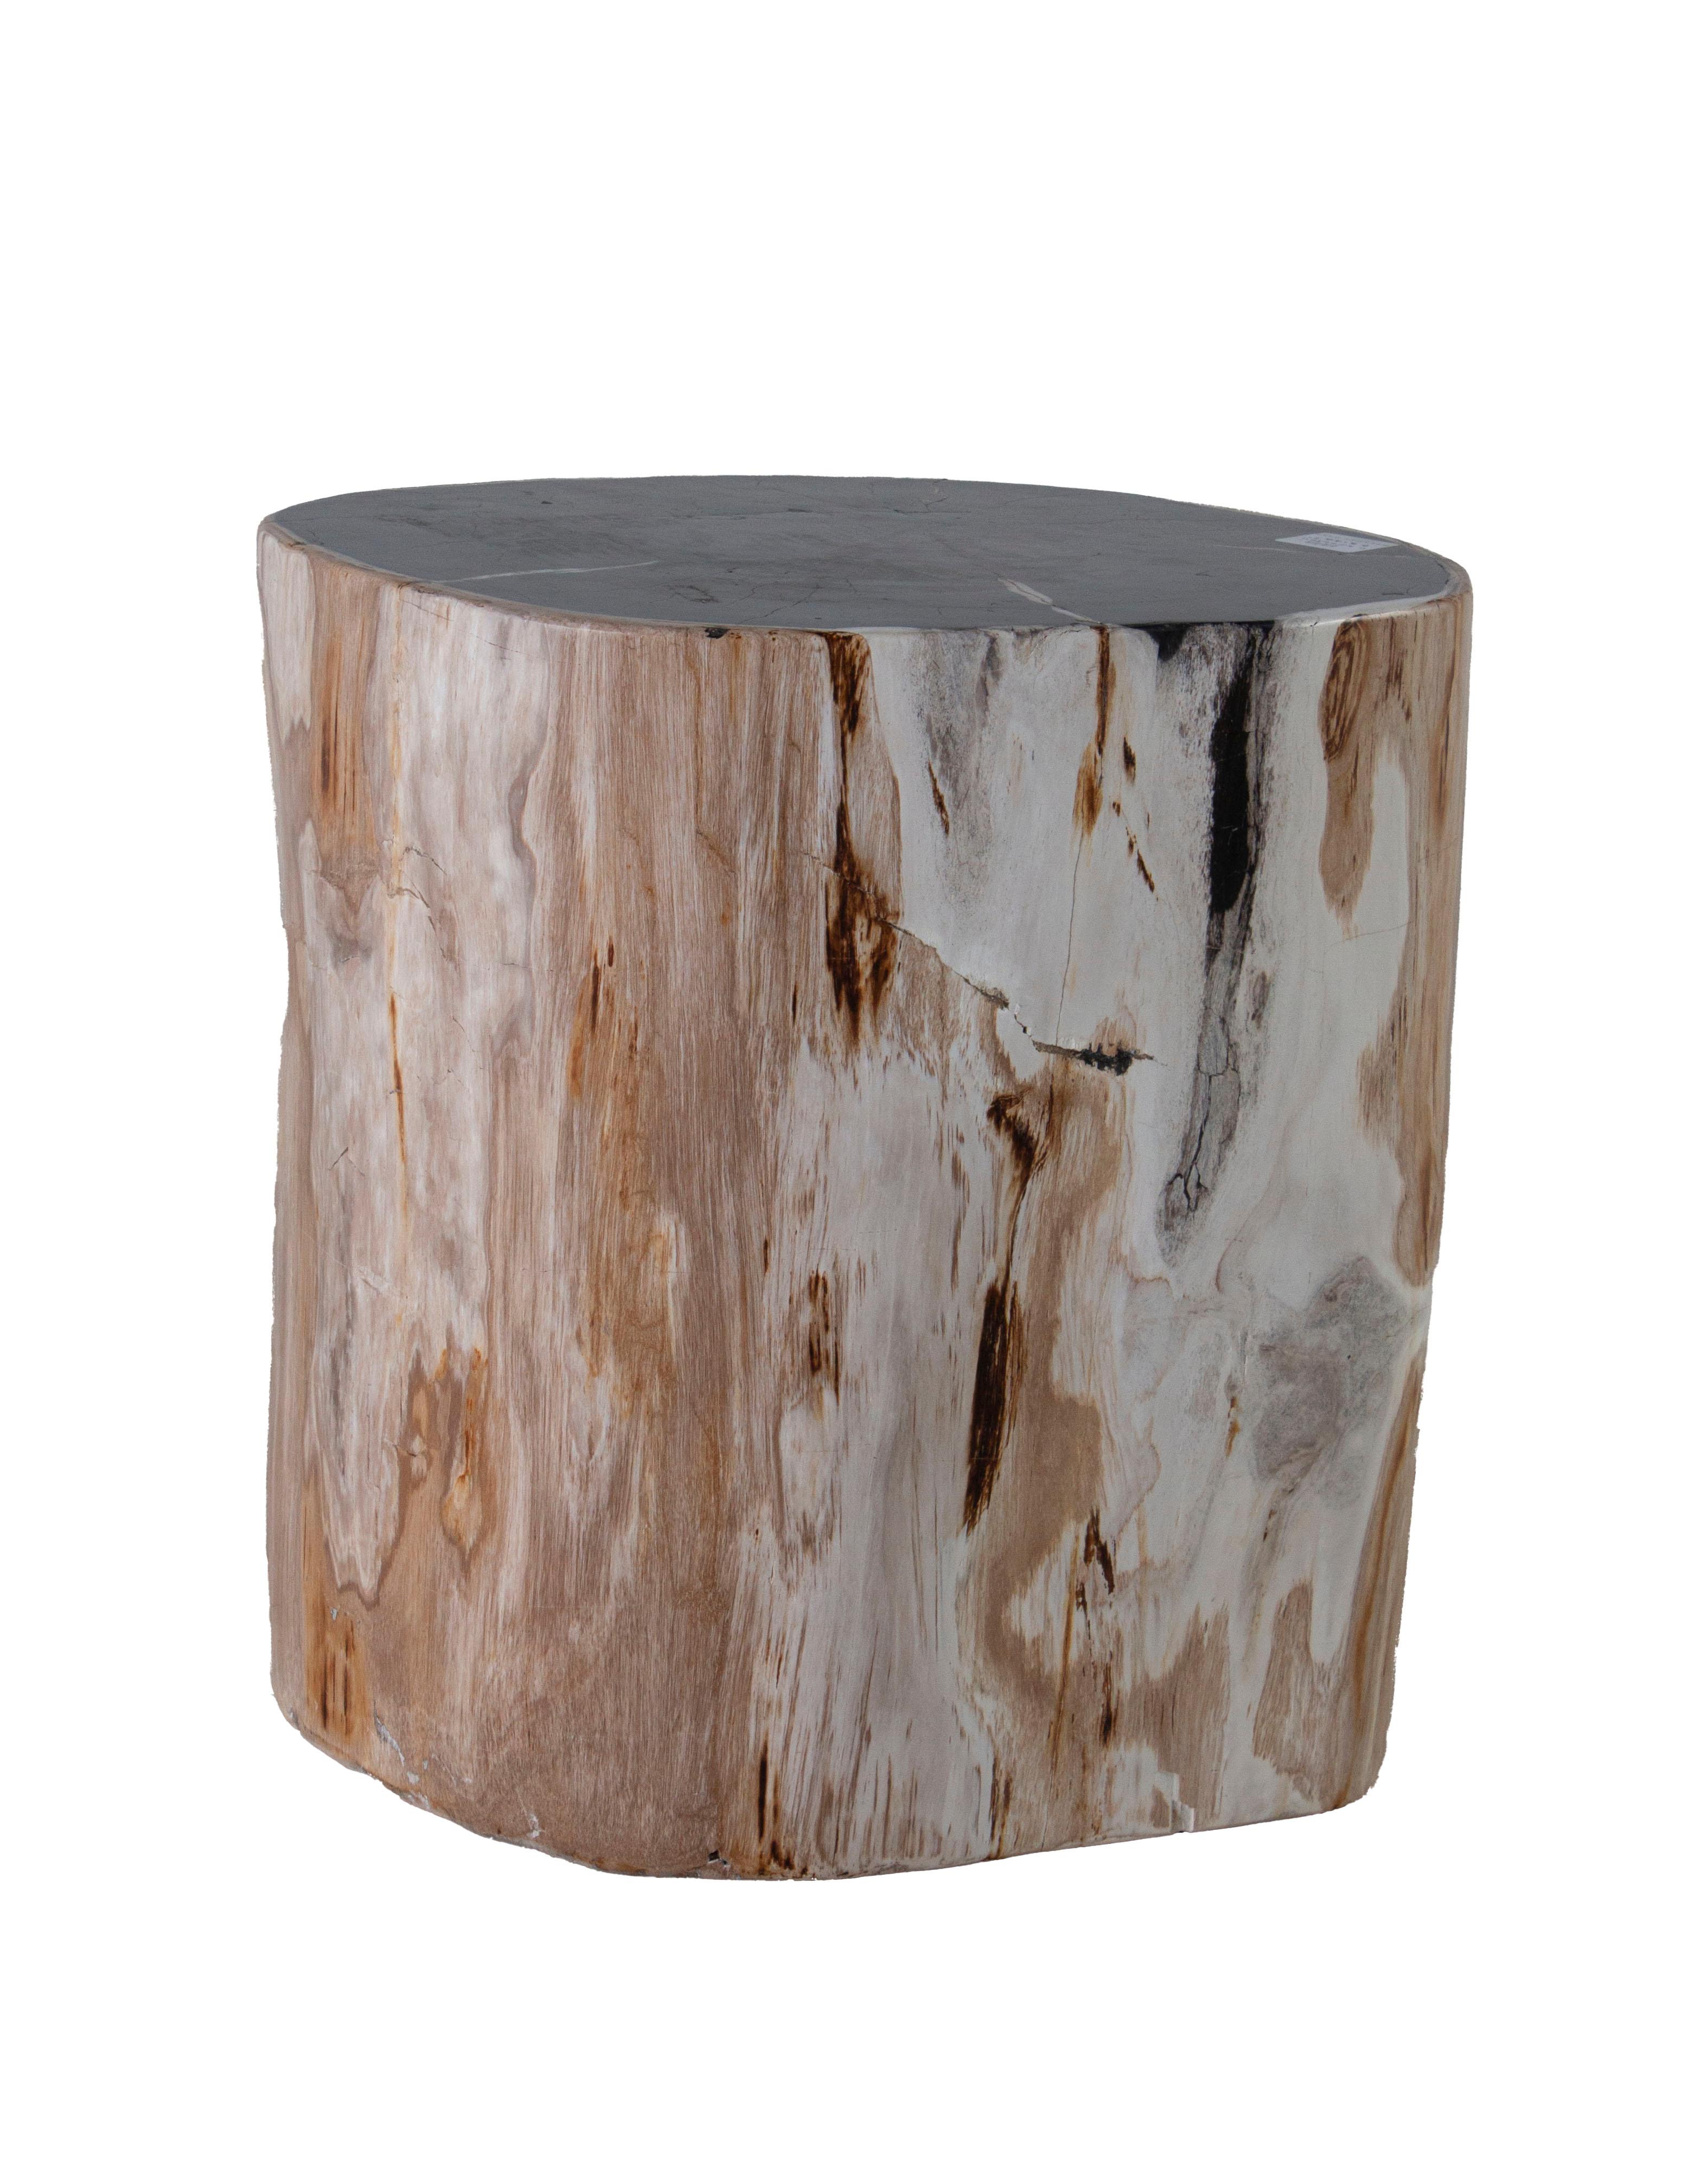 Petrified wood side table.

Sourced from Europe. One of a kind table. 